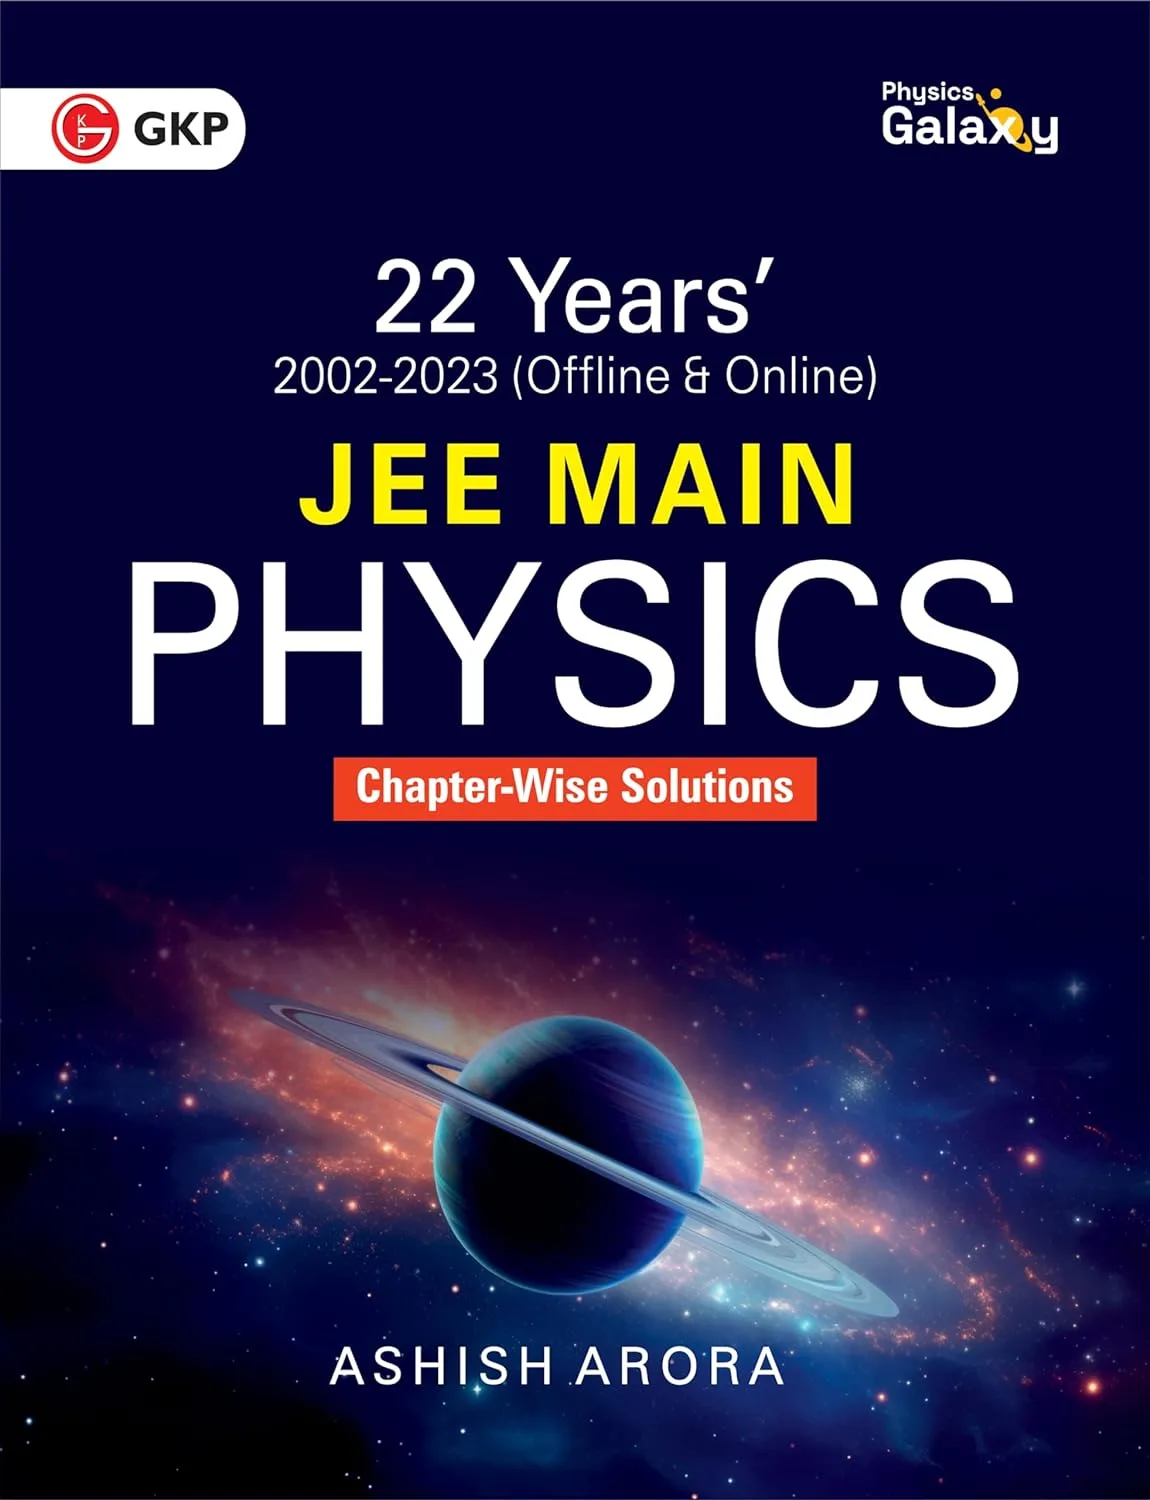 Physics Galaxy JEE Main Chapter-wise solved papers